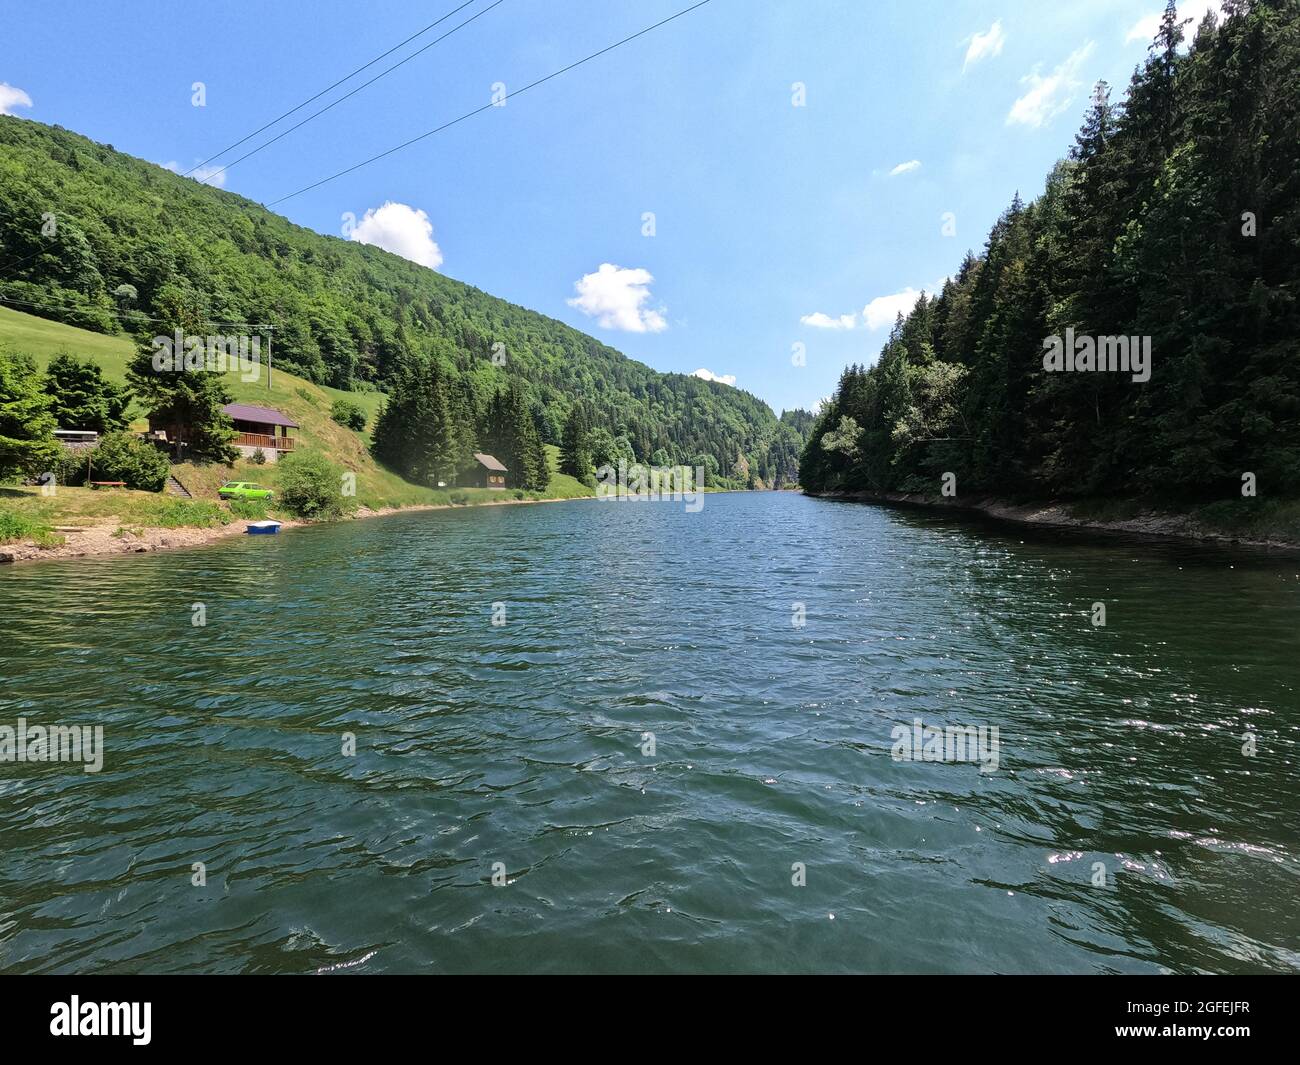 A view of the Palcmanska masa water reservoir in the village of Dedinky Stock Photo